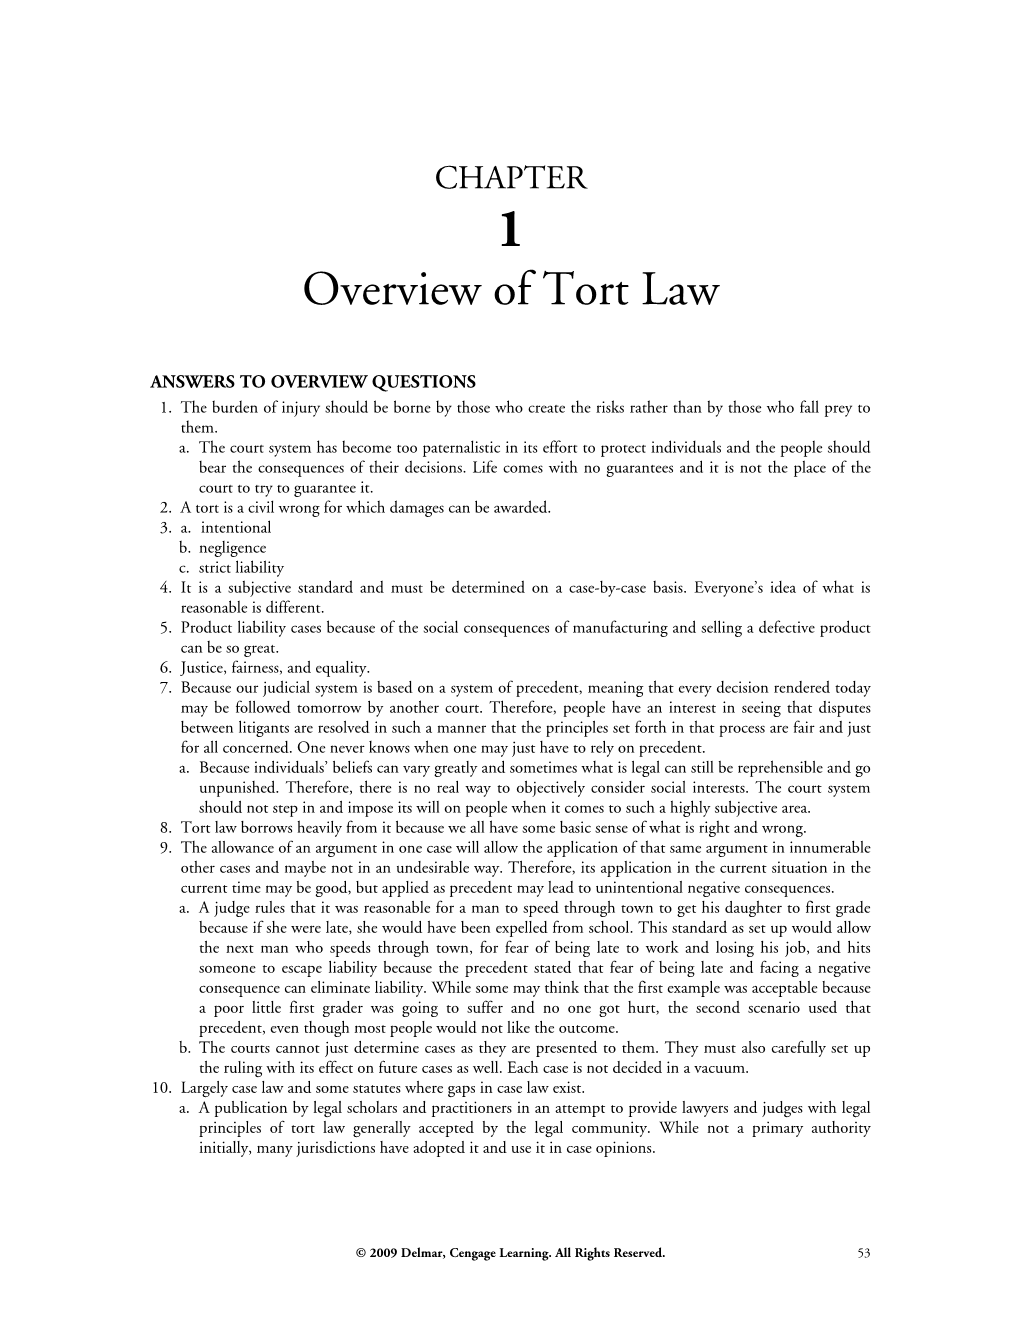 Overview of Tort Law